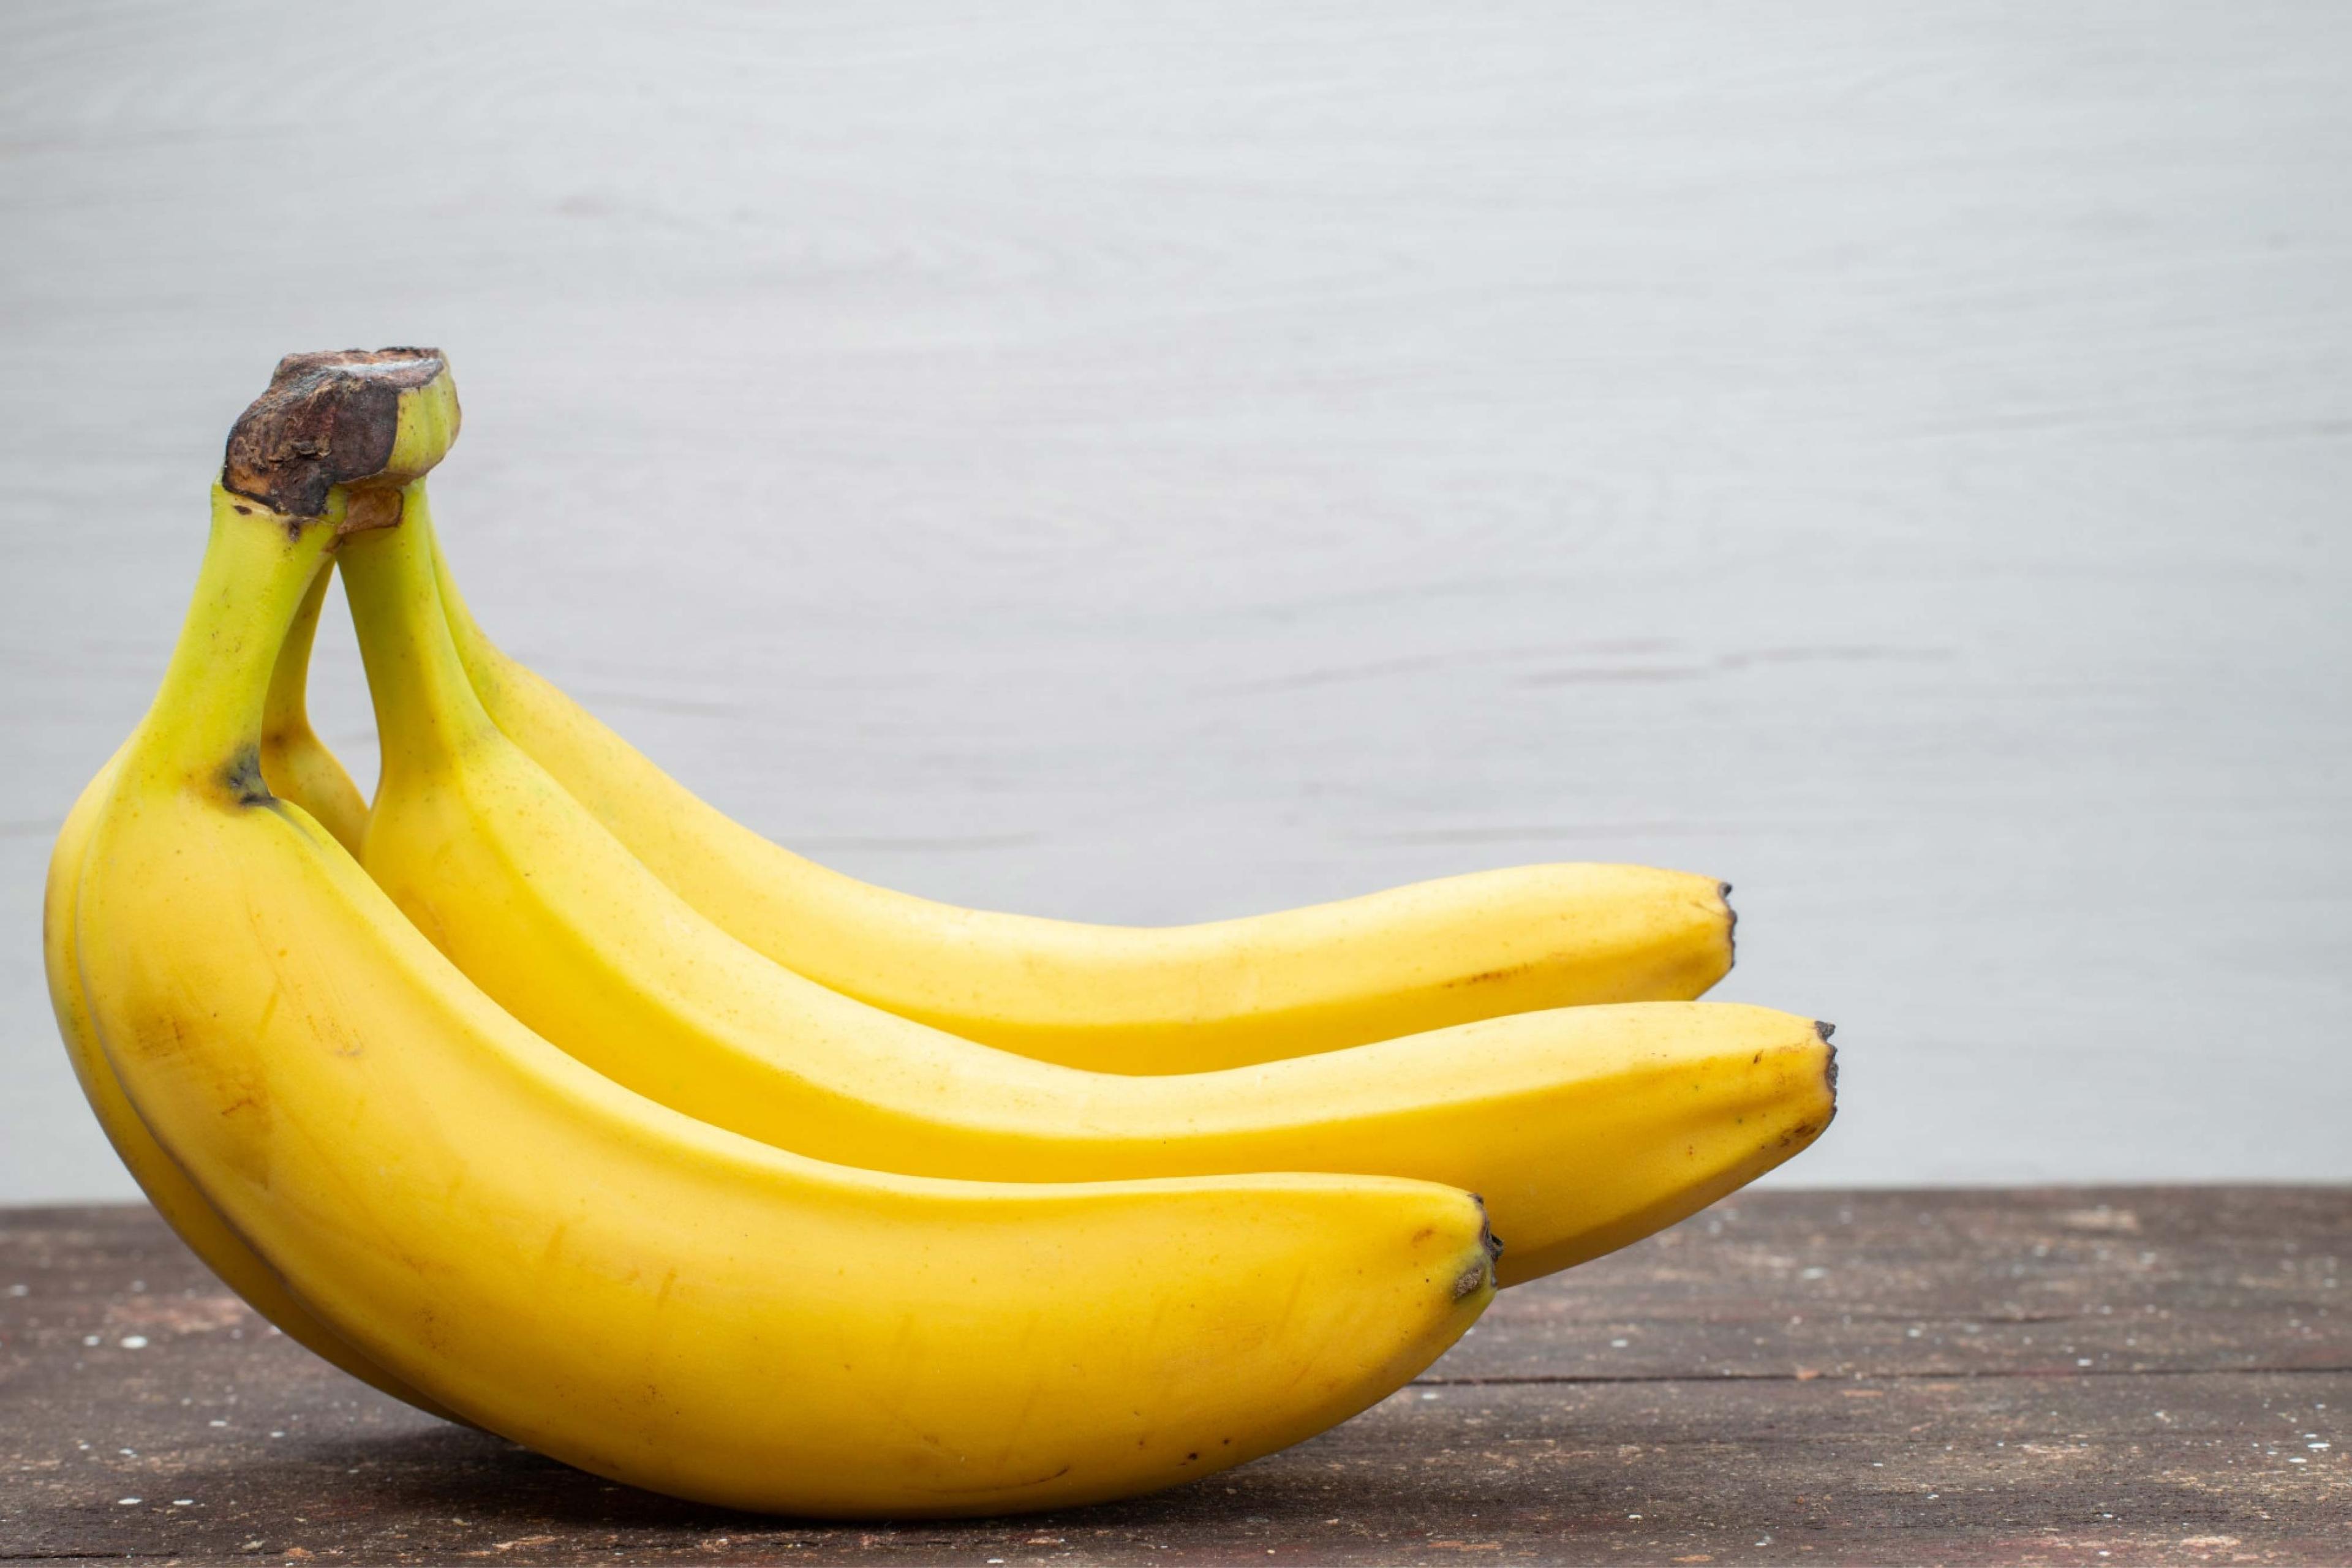 Health Benefits of Bananas and Nutritional Value